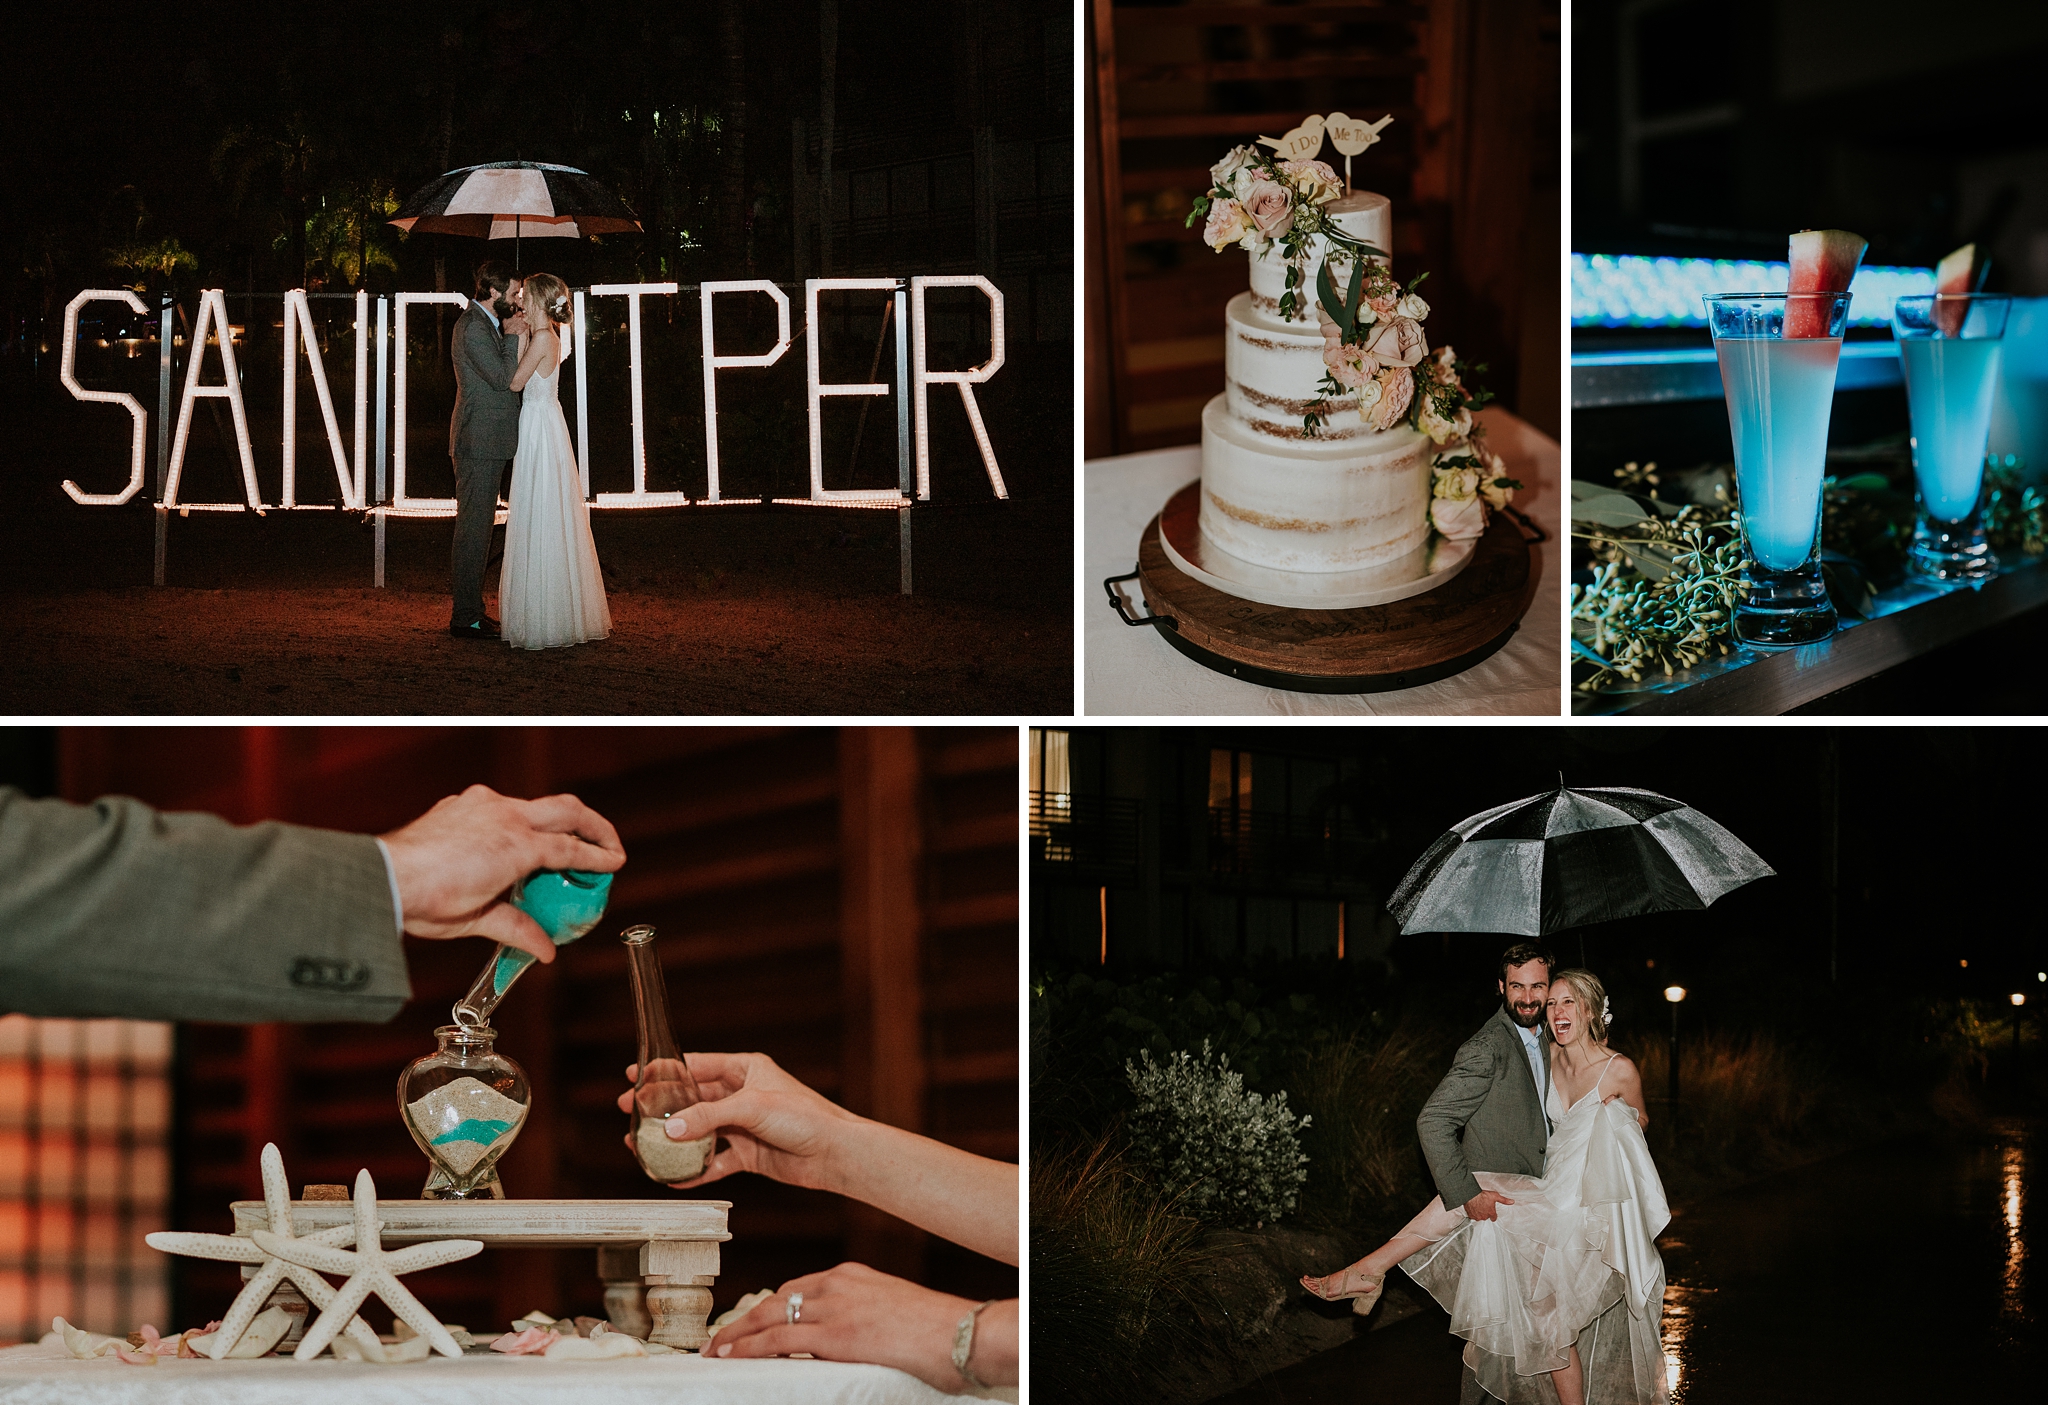 Collage of rainy day wedding photos with the Club Med Sandpiper Bay neon sign, a wedding cake, signature watermelon martini cocktails, sand ceremony, and the wedding couple out in the rain at night with an umbrella.